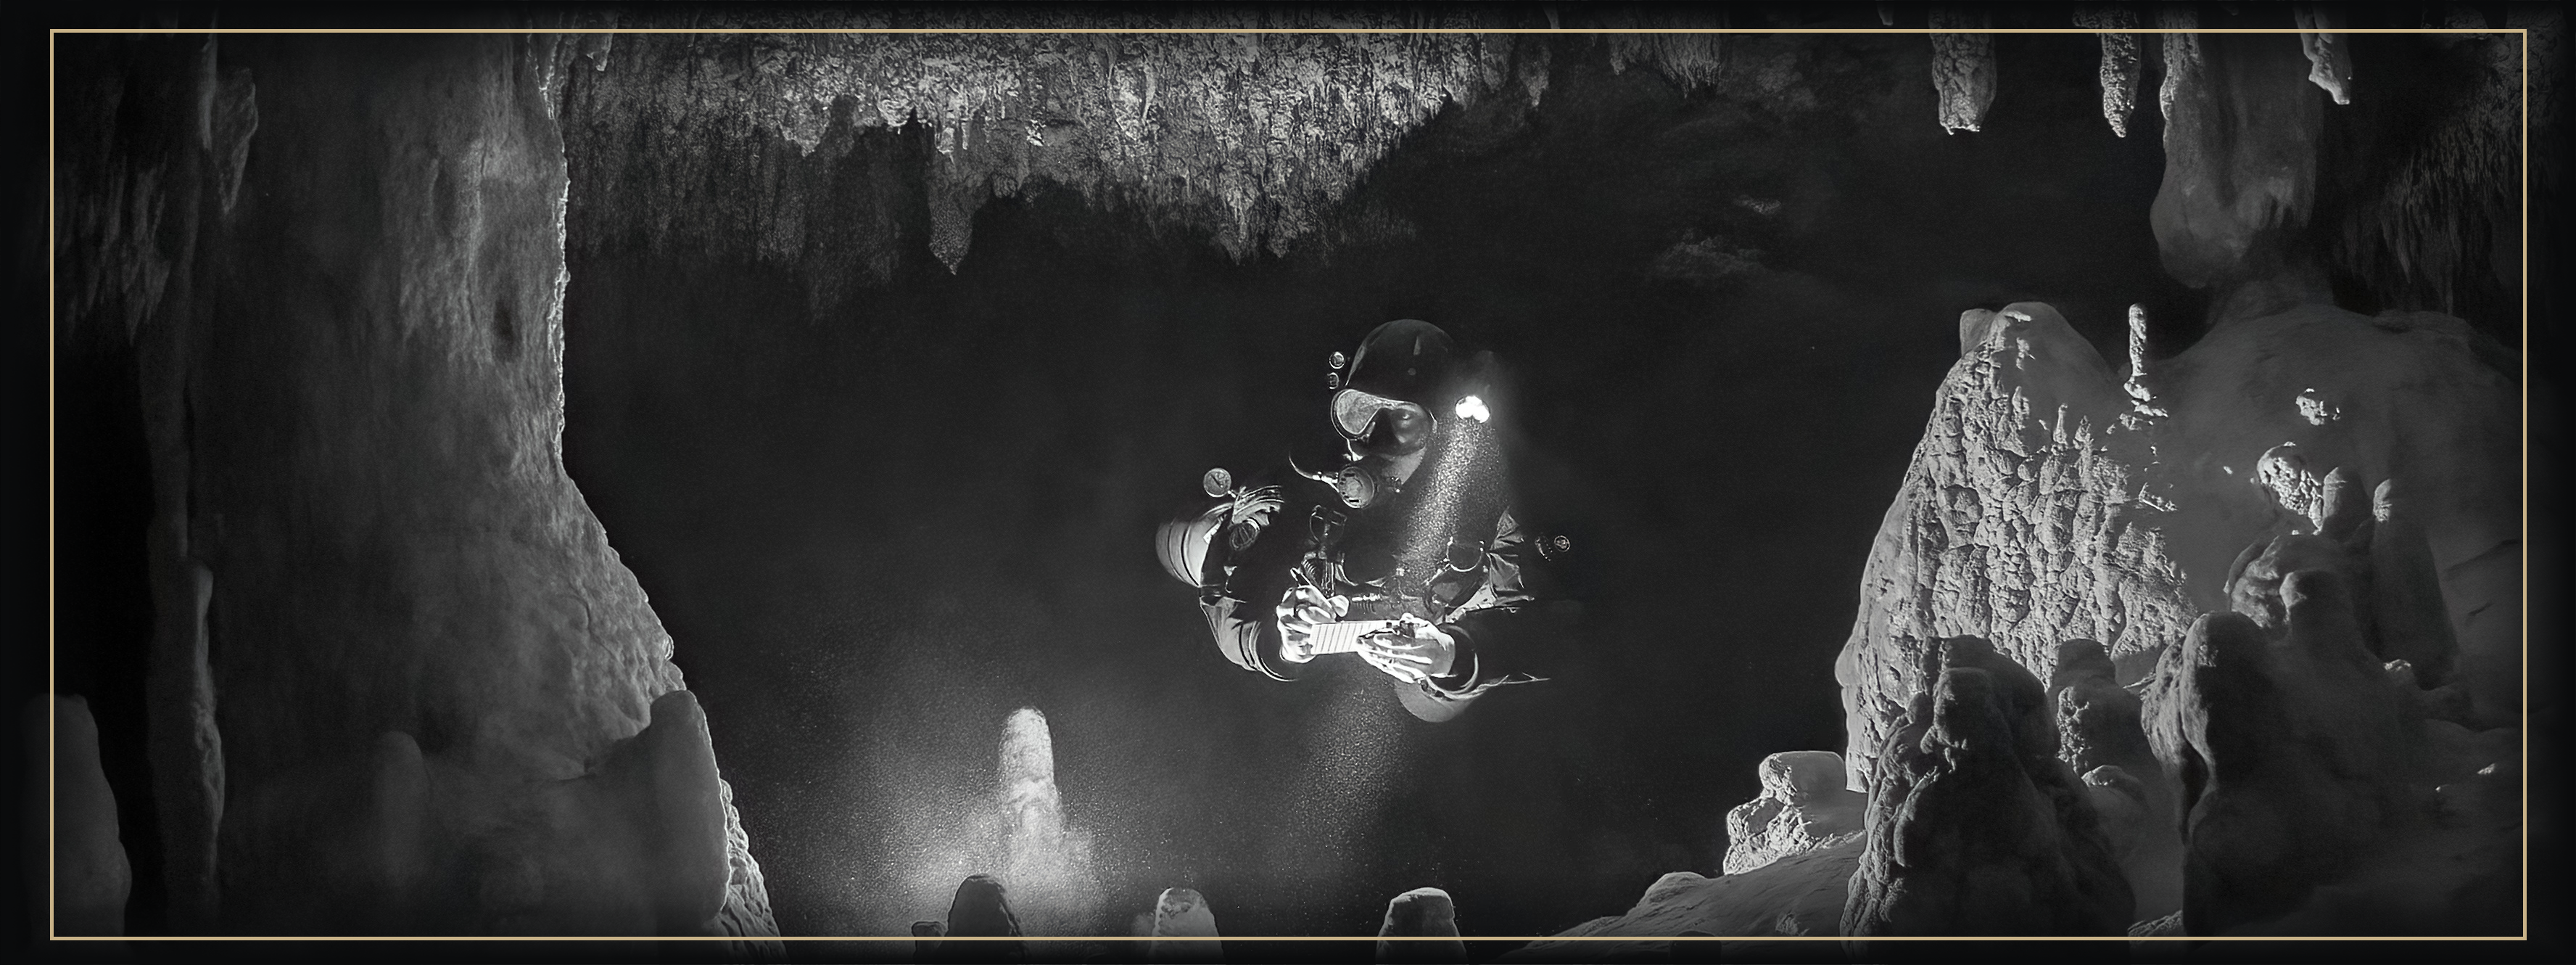 A cave diver completes an underwater cave survey at Cenote Dos Palmas.